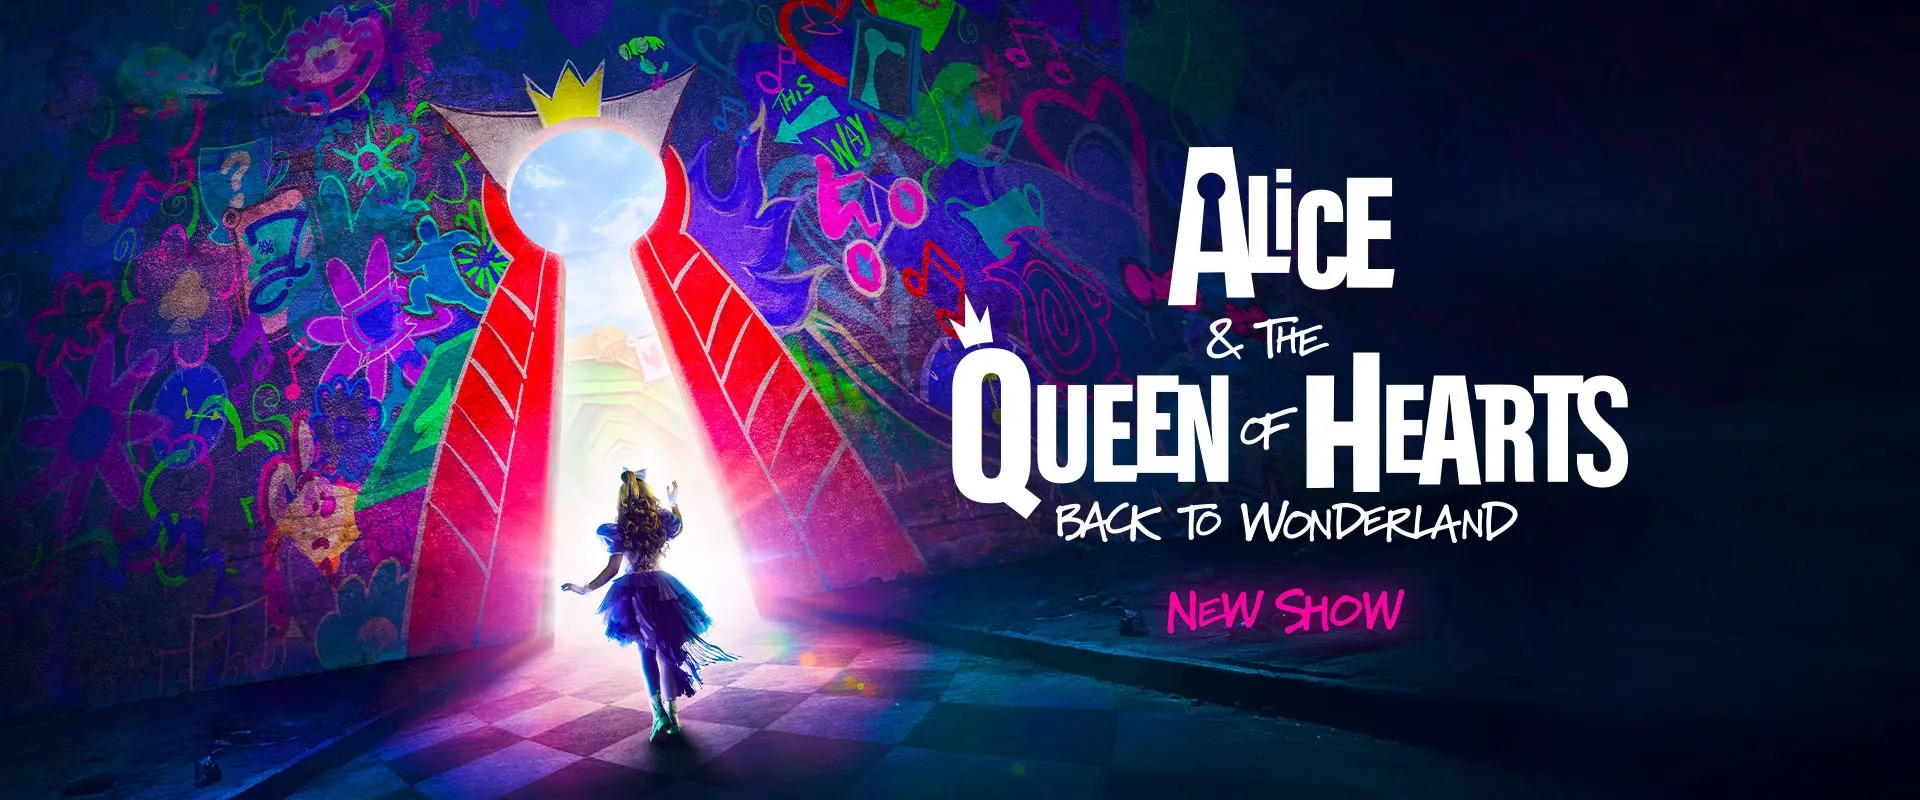 A silhouette of a girl in a blue dress walks towards a bright, keyhole-shaped doorway with vibrant graffiti walls. Text reads "Alice & the Queen of Hearts: Back to Wonderland - New Show."